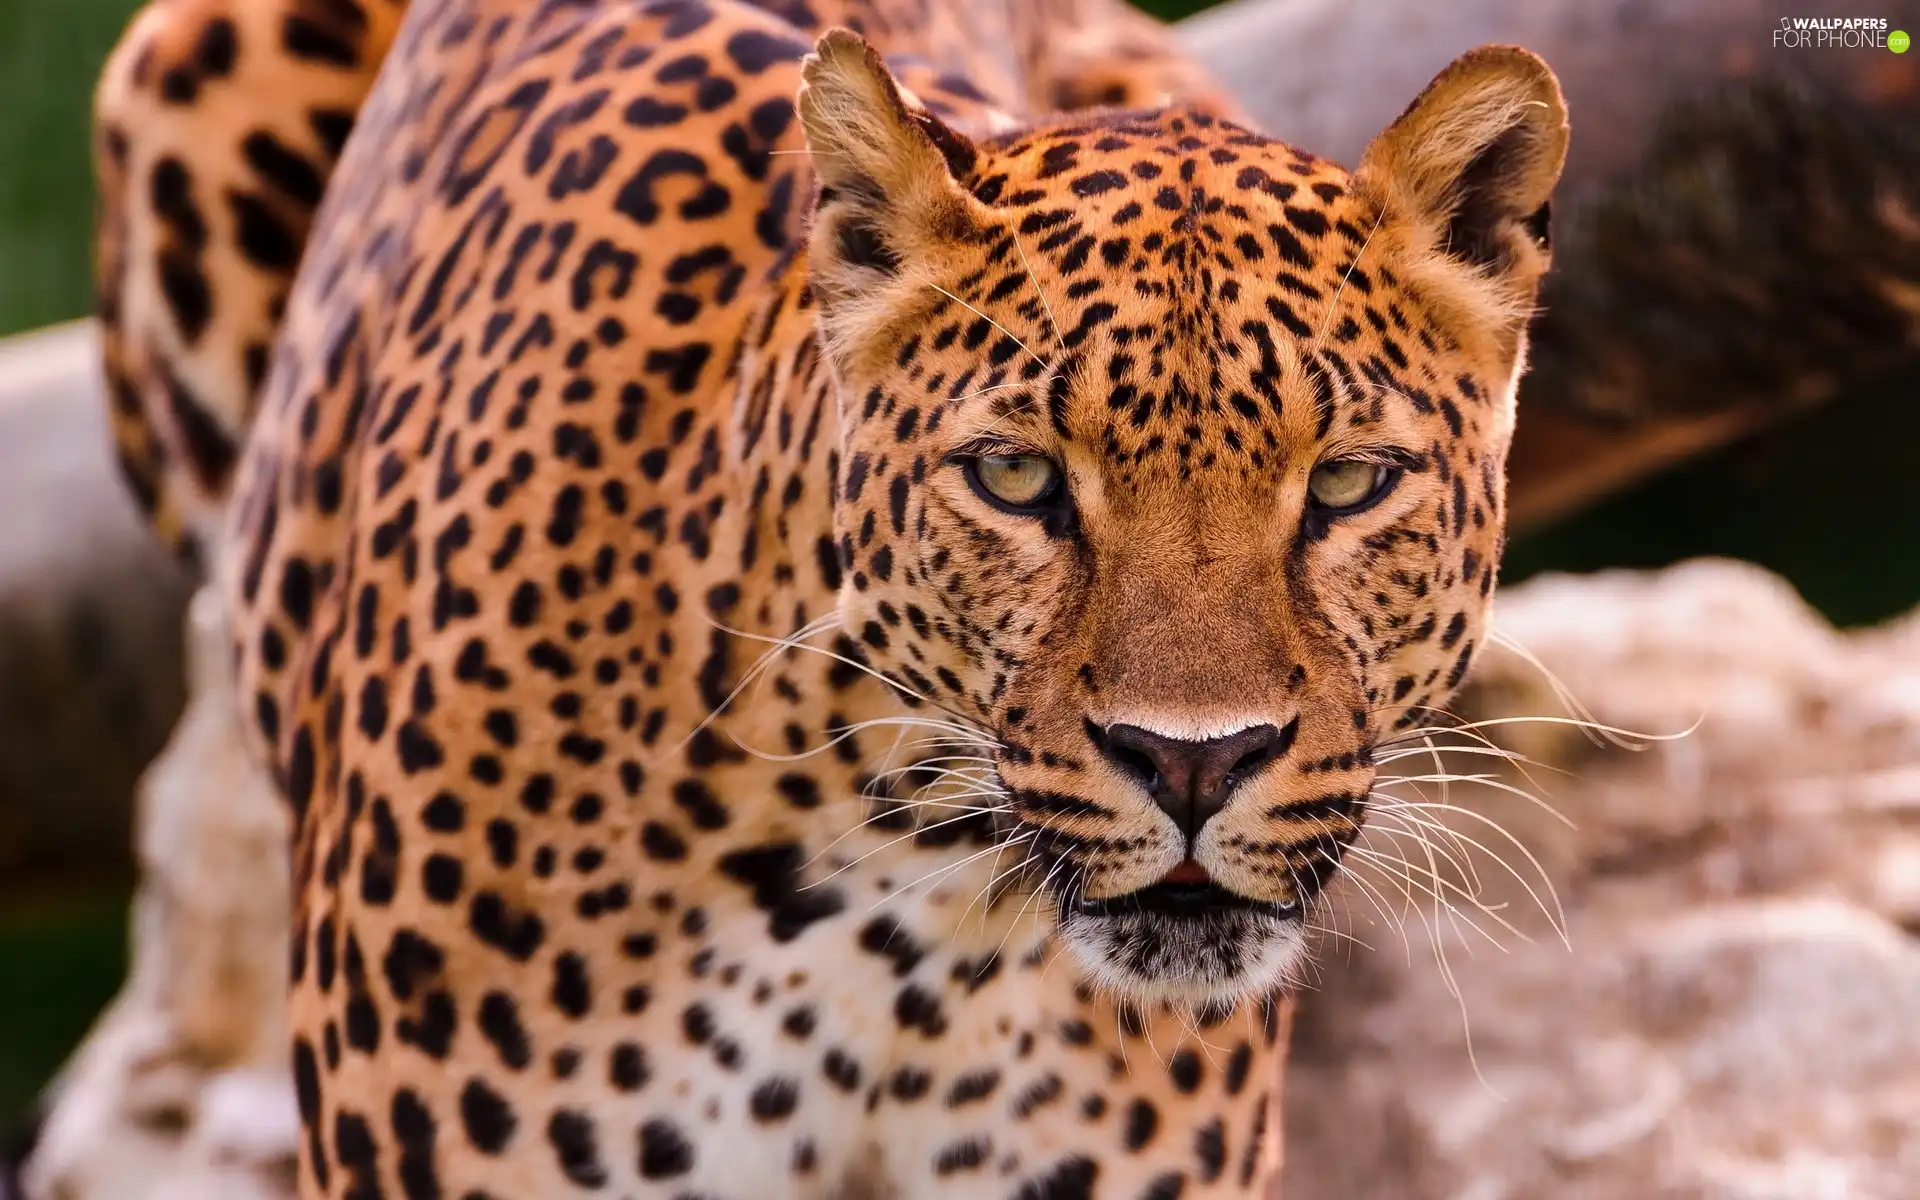 Leopards, The look